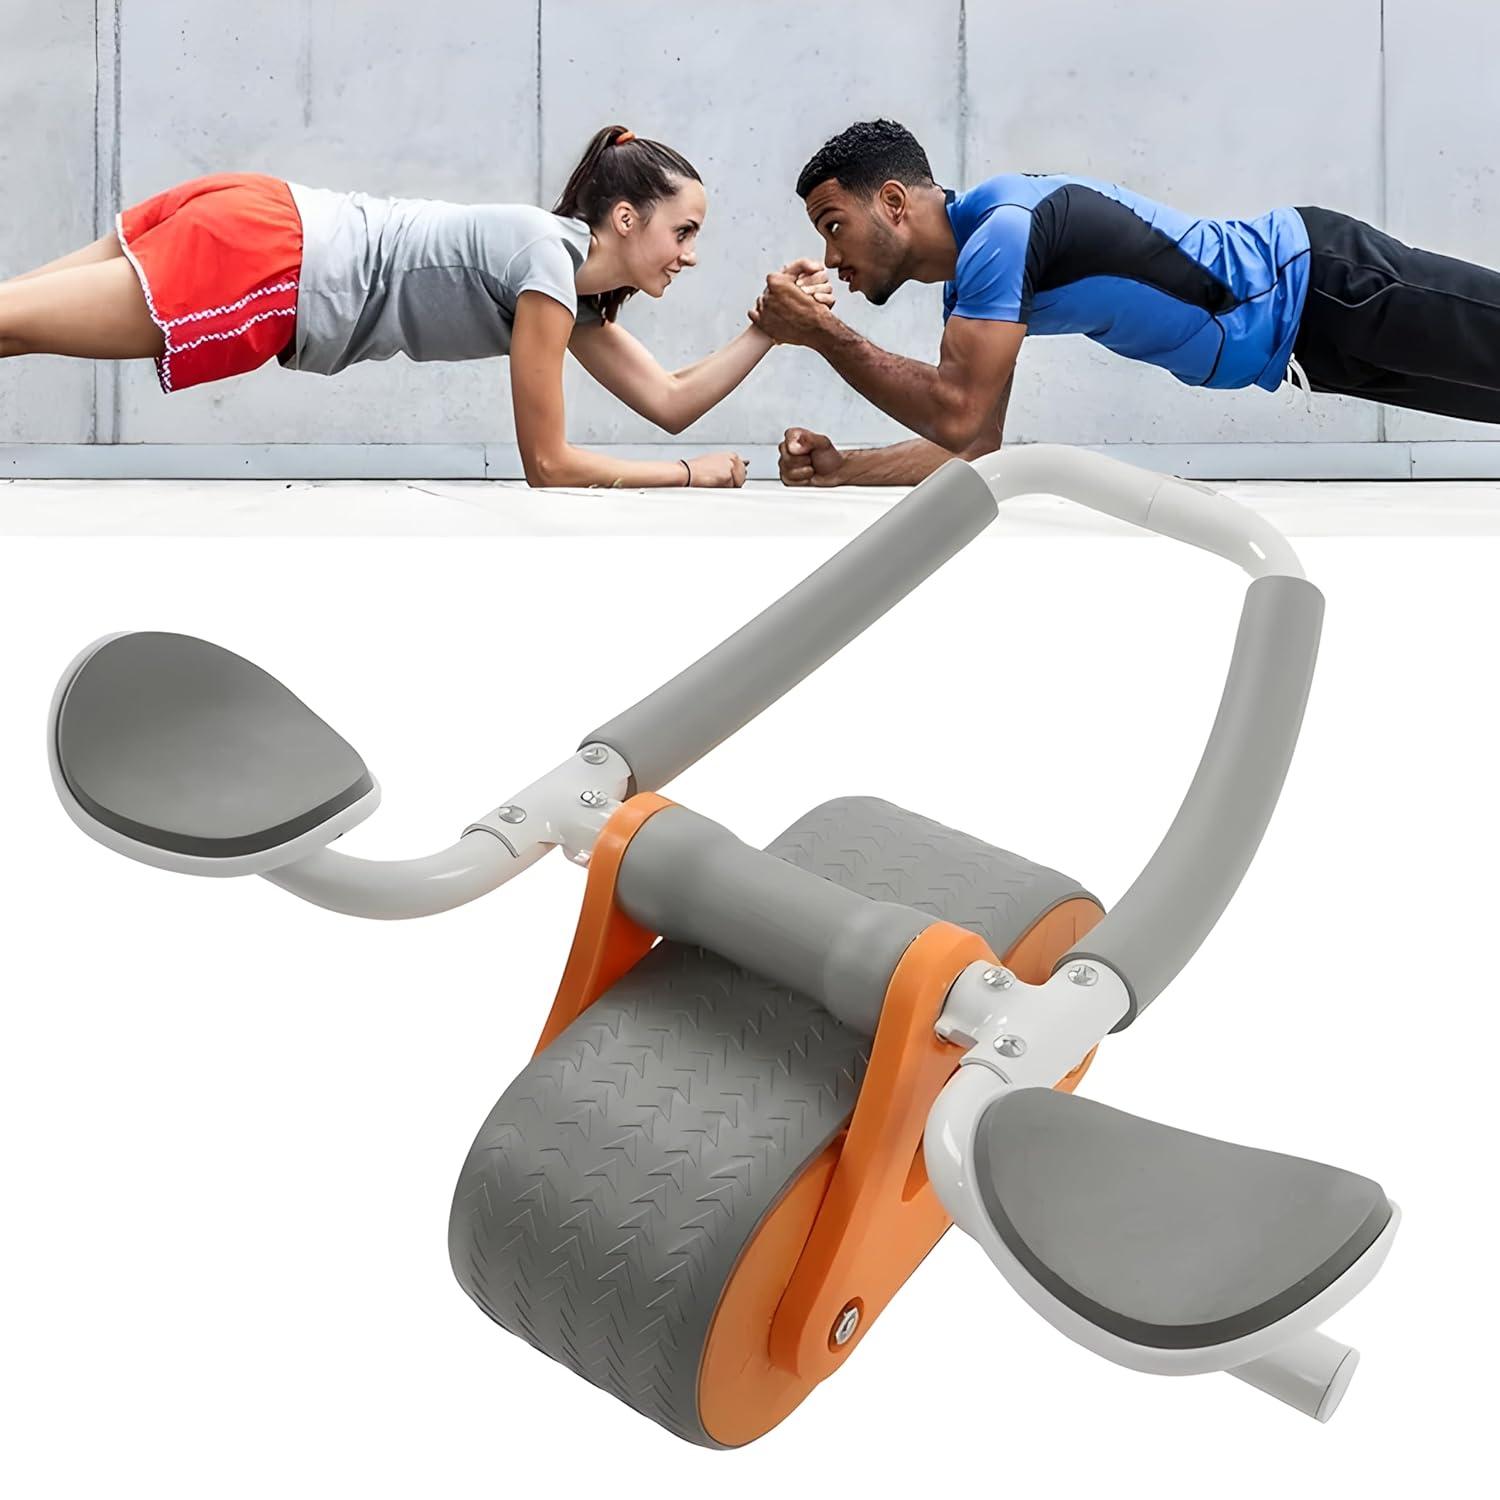 ab exercise equipment for fitness and core multipurpose knee pads and strenght gym support